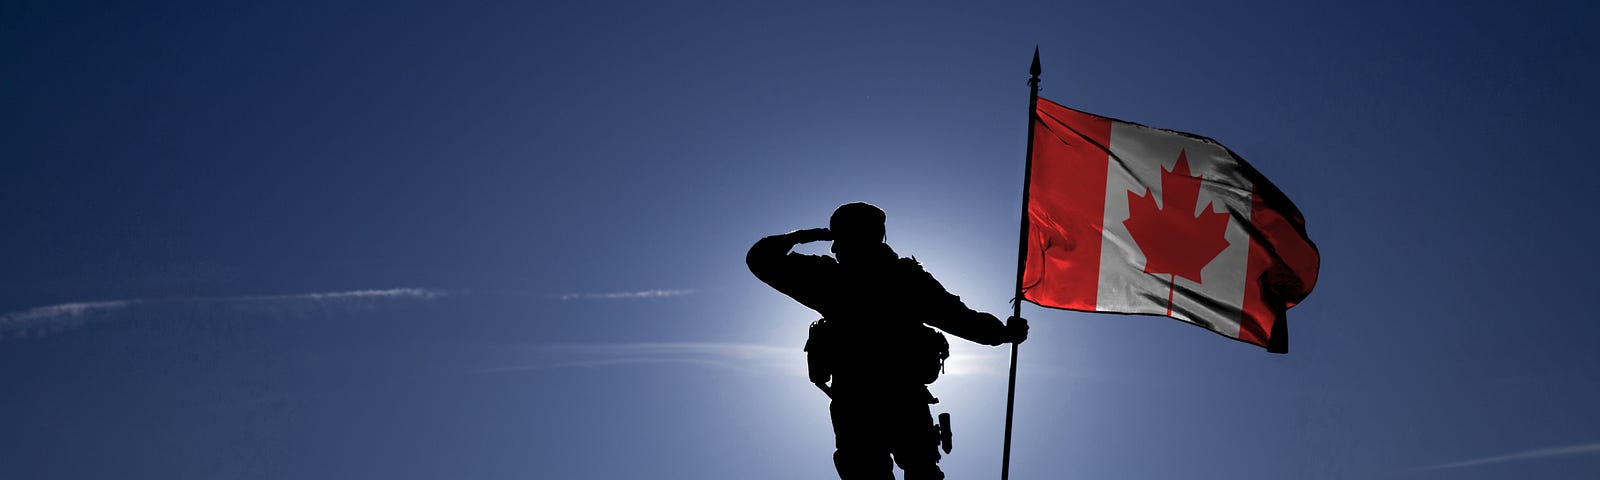 man on mountain with Canadian flag